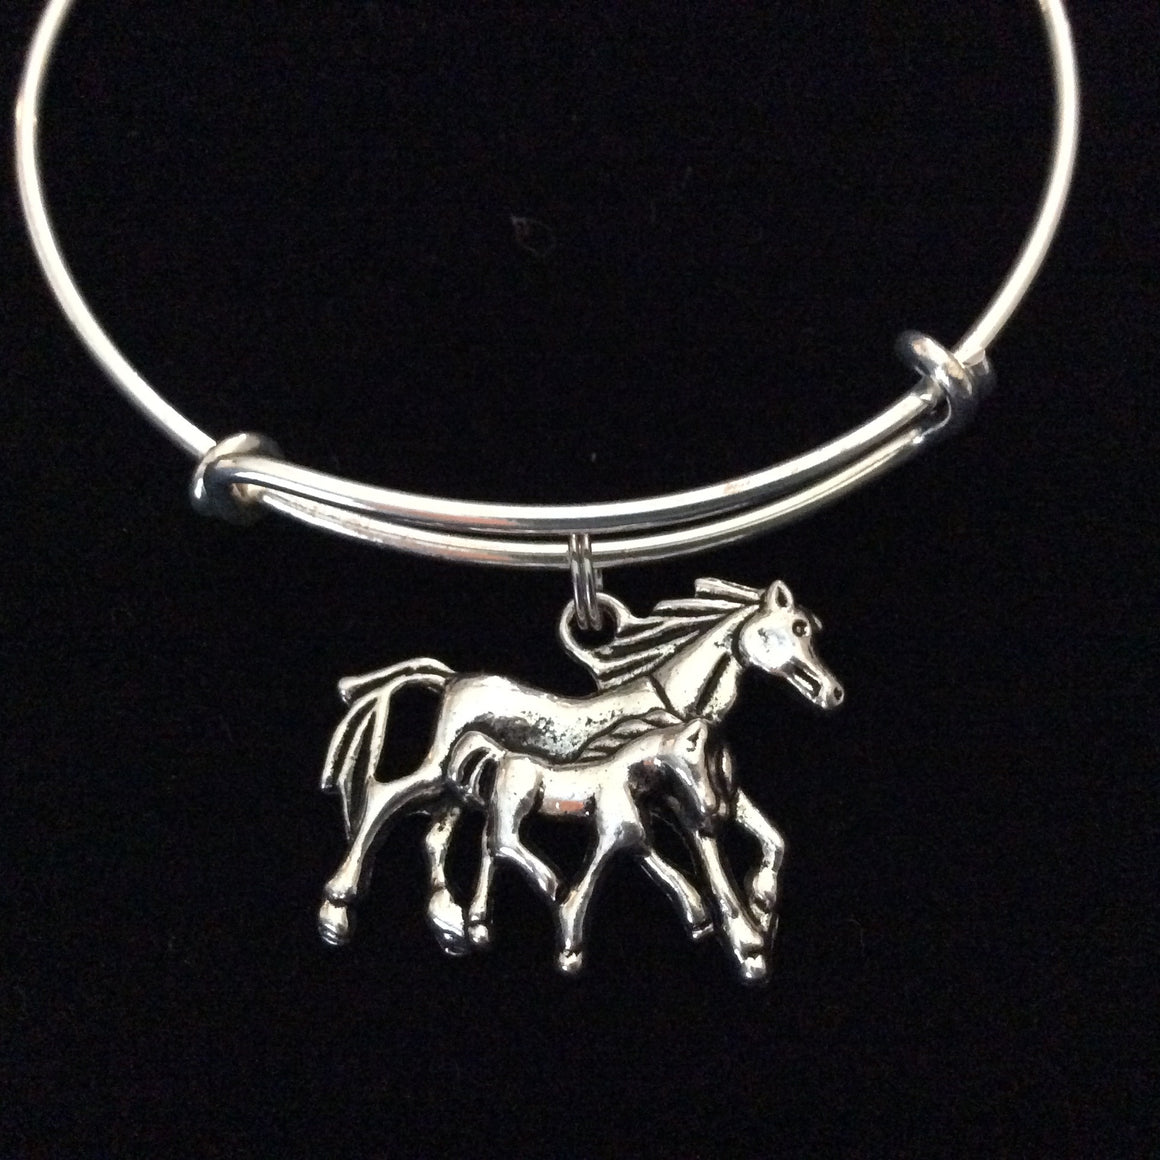 mother and filly running horse expandable bracelet silver adjustable bangle